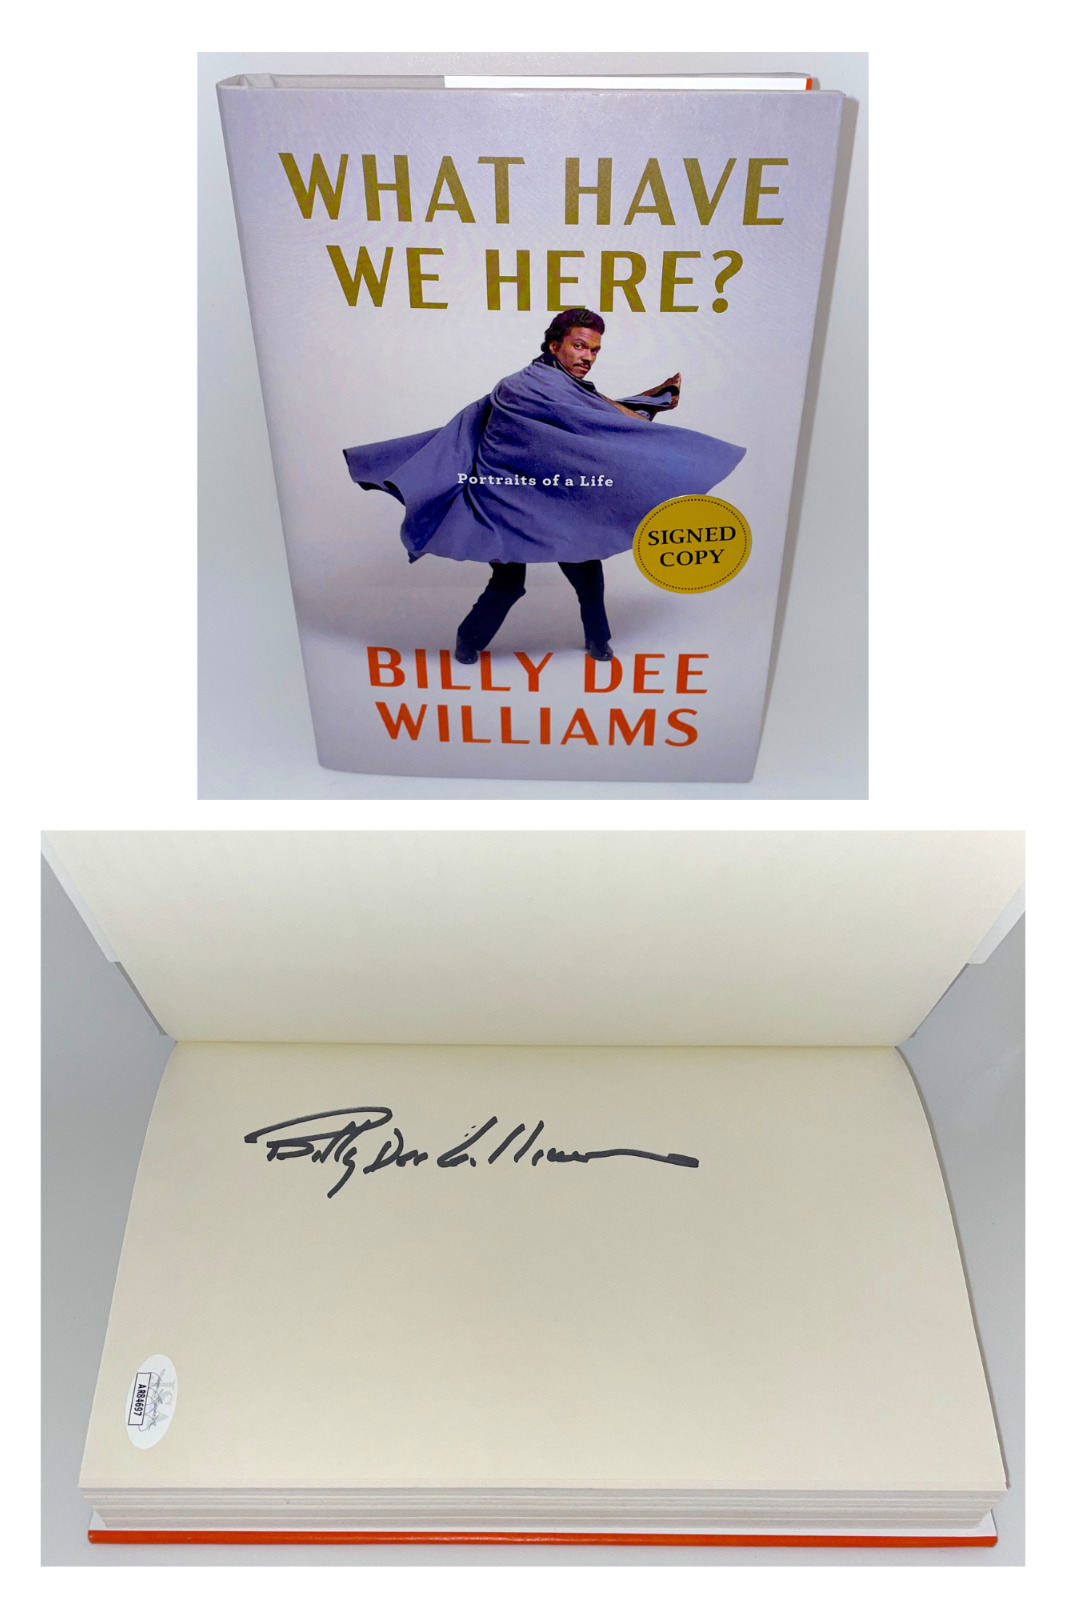 BILLY DEE WILLIAMS Hand Signed Book WHAT HAVE WE HERE? Autograph JSA COA Cert